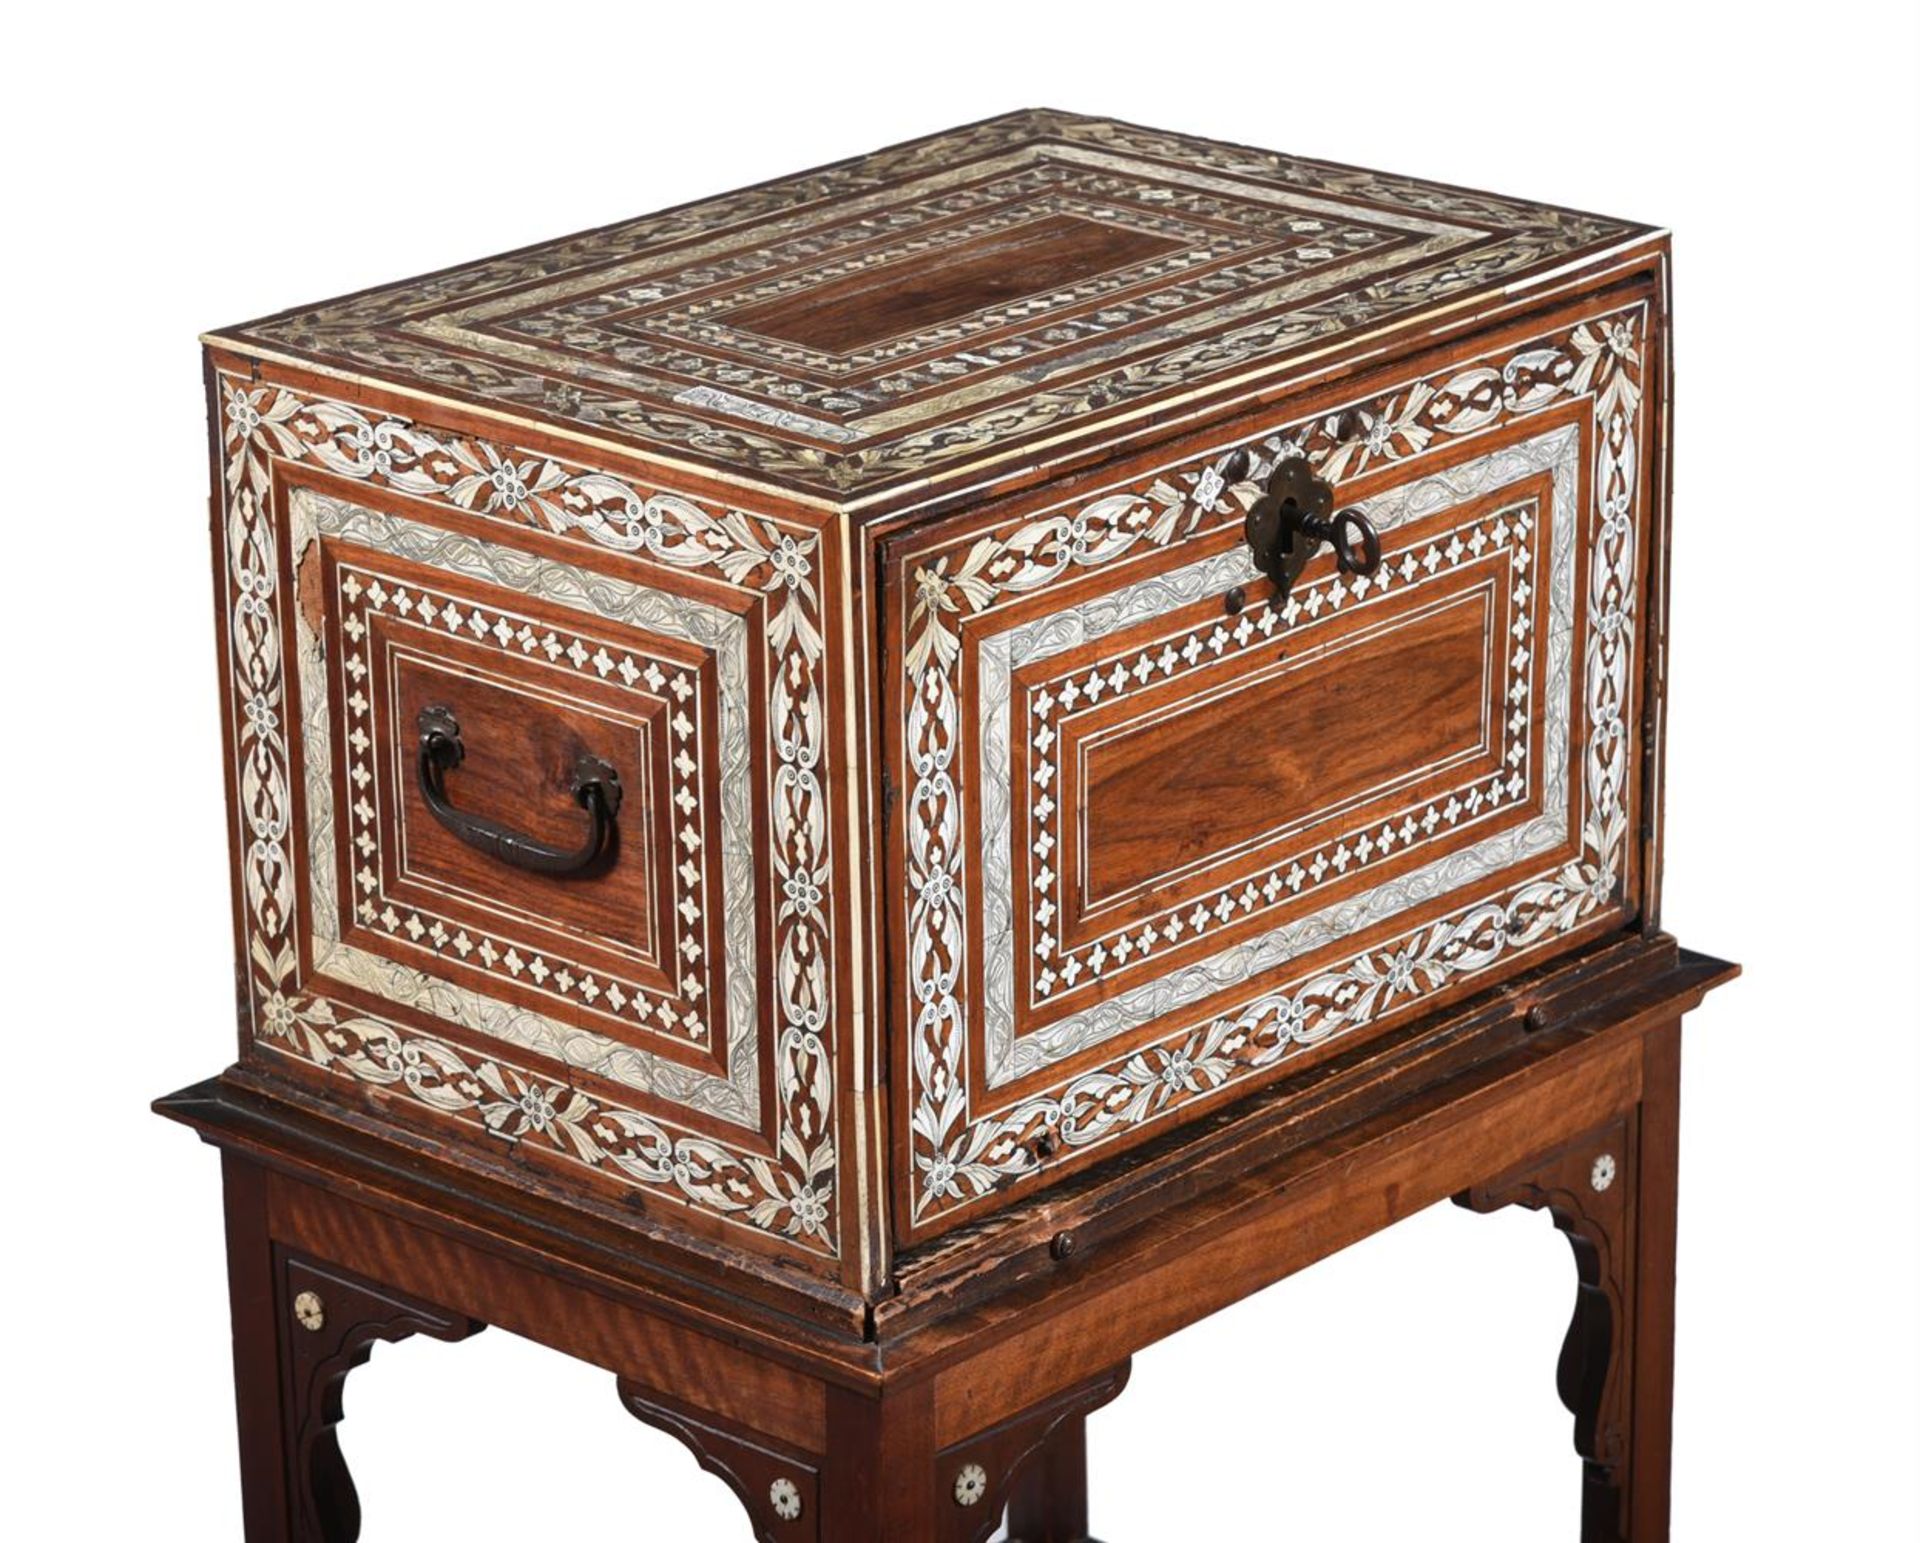 Y AN INDO-PORTUGUESE ROSEWOOD AND IVORY INLAID CABINET ON STAND, THE CABINET 17TH CENTURY - Bild 2 aus 3